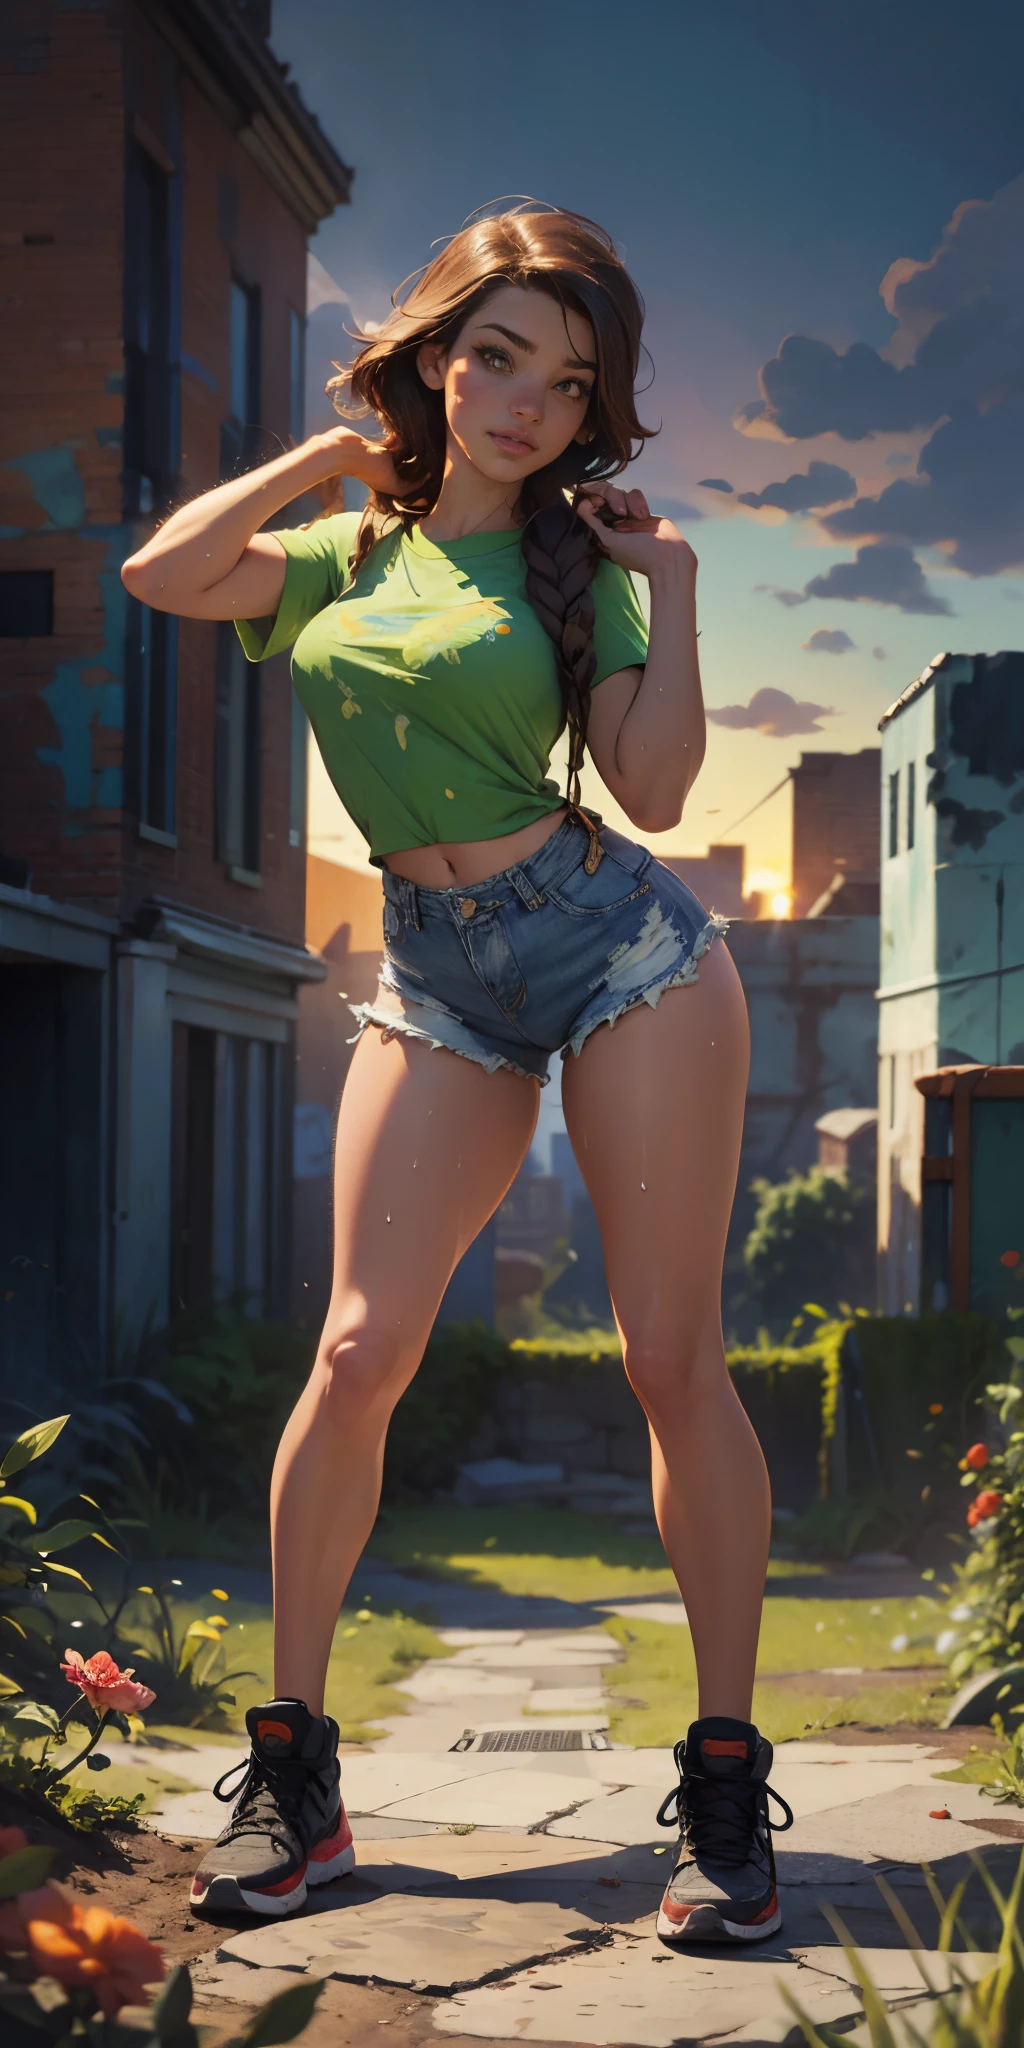 2076 year. n.UH. The Urban Ruins of the Wasteland, Female huntress picking fruit in the garden, pretty  face, Ragged shirt and denim shorts ,  legs long, Sweat through, sun rising, Nice warm colors, Full body photo from head to toe